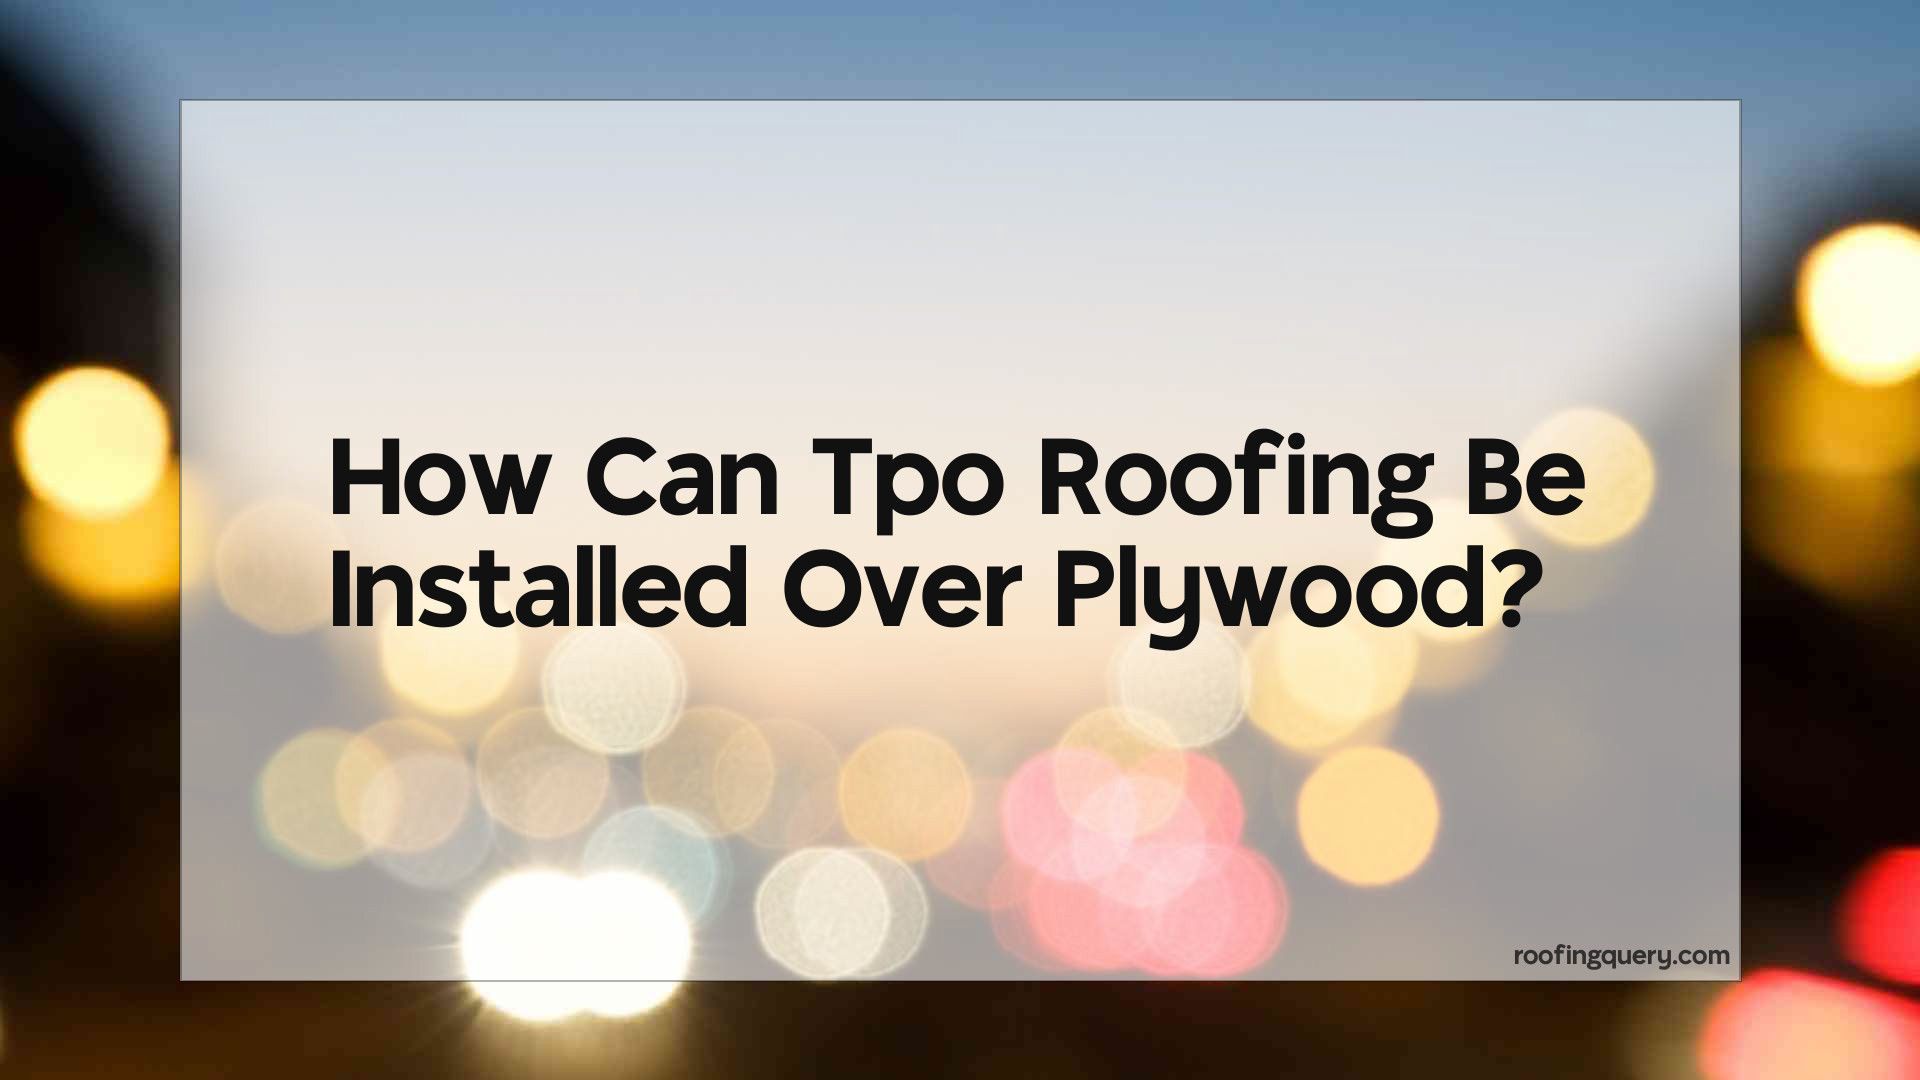 Can Tpo Roofing Be Installed Over Plywood